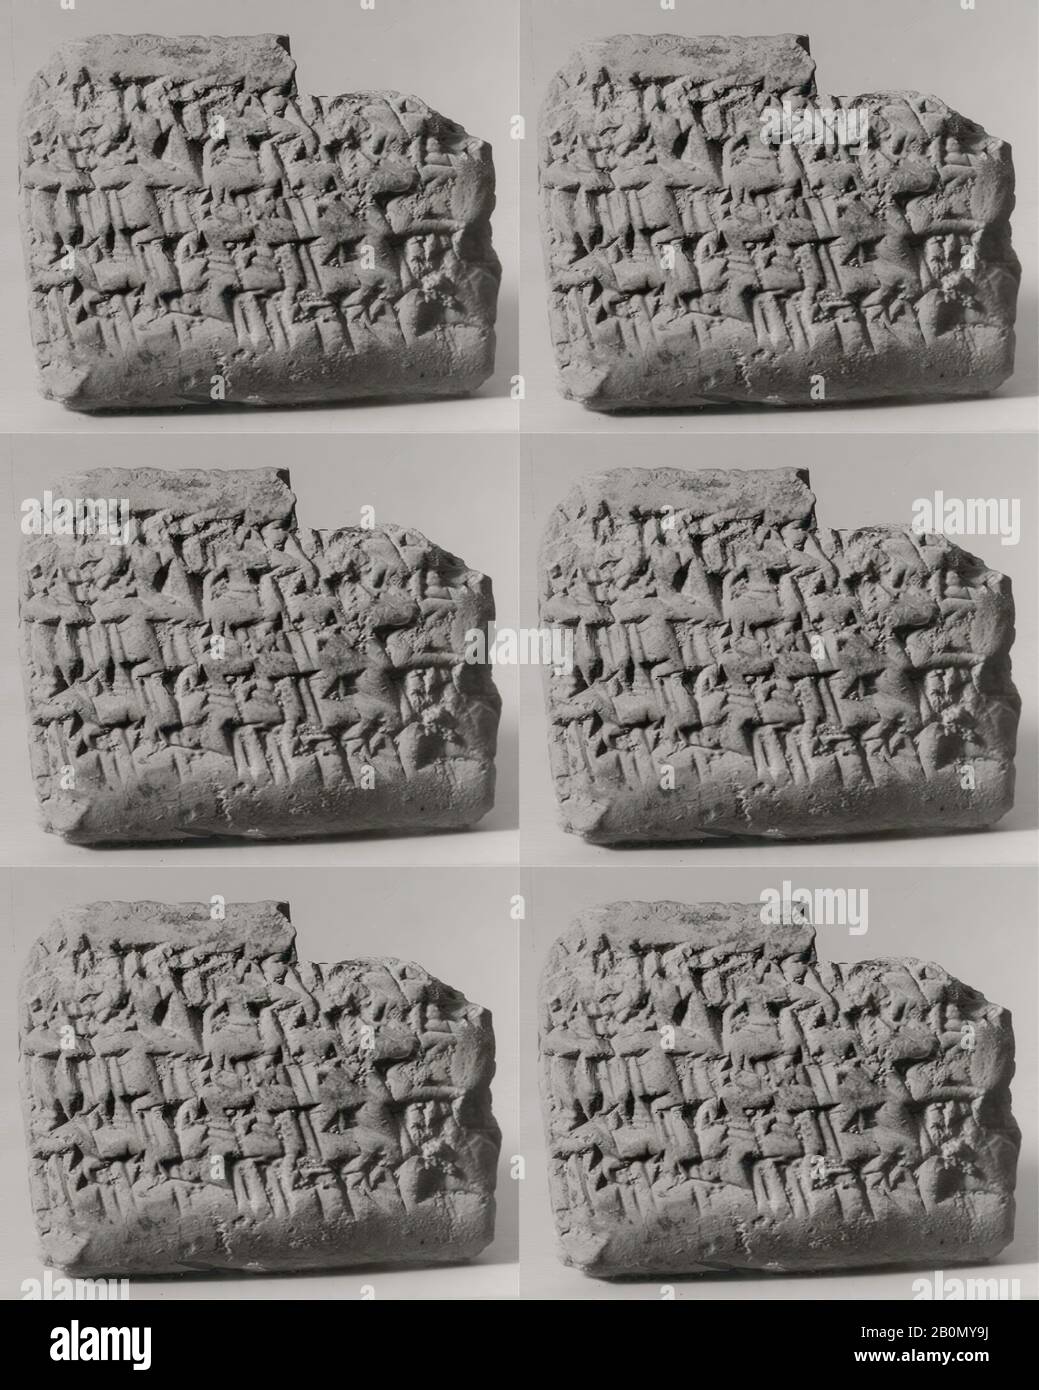 Cuneiform tablet: quittance for rent, Esagilaya archive, Achaemenid, Achaemenid, Date ca. 523 B.C., Mesopotamia, probably from Babylon (modern Hillah), Achaemenid, Clay, 3.6 x 4.6 x 1.8 cm (1 3/8 x 1 3/4 x 3/4 in.), Clay-Tablets-Inscribed Stock Photo